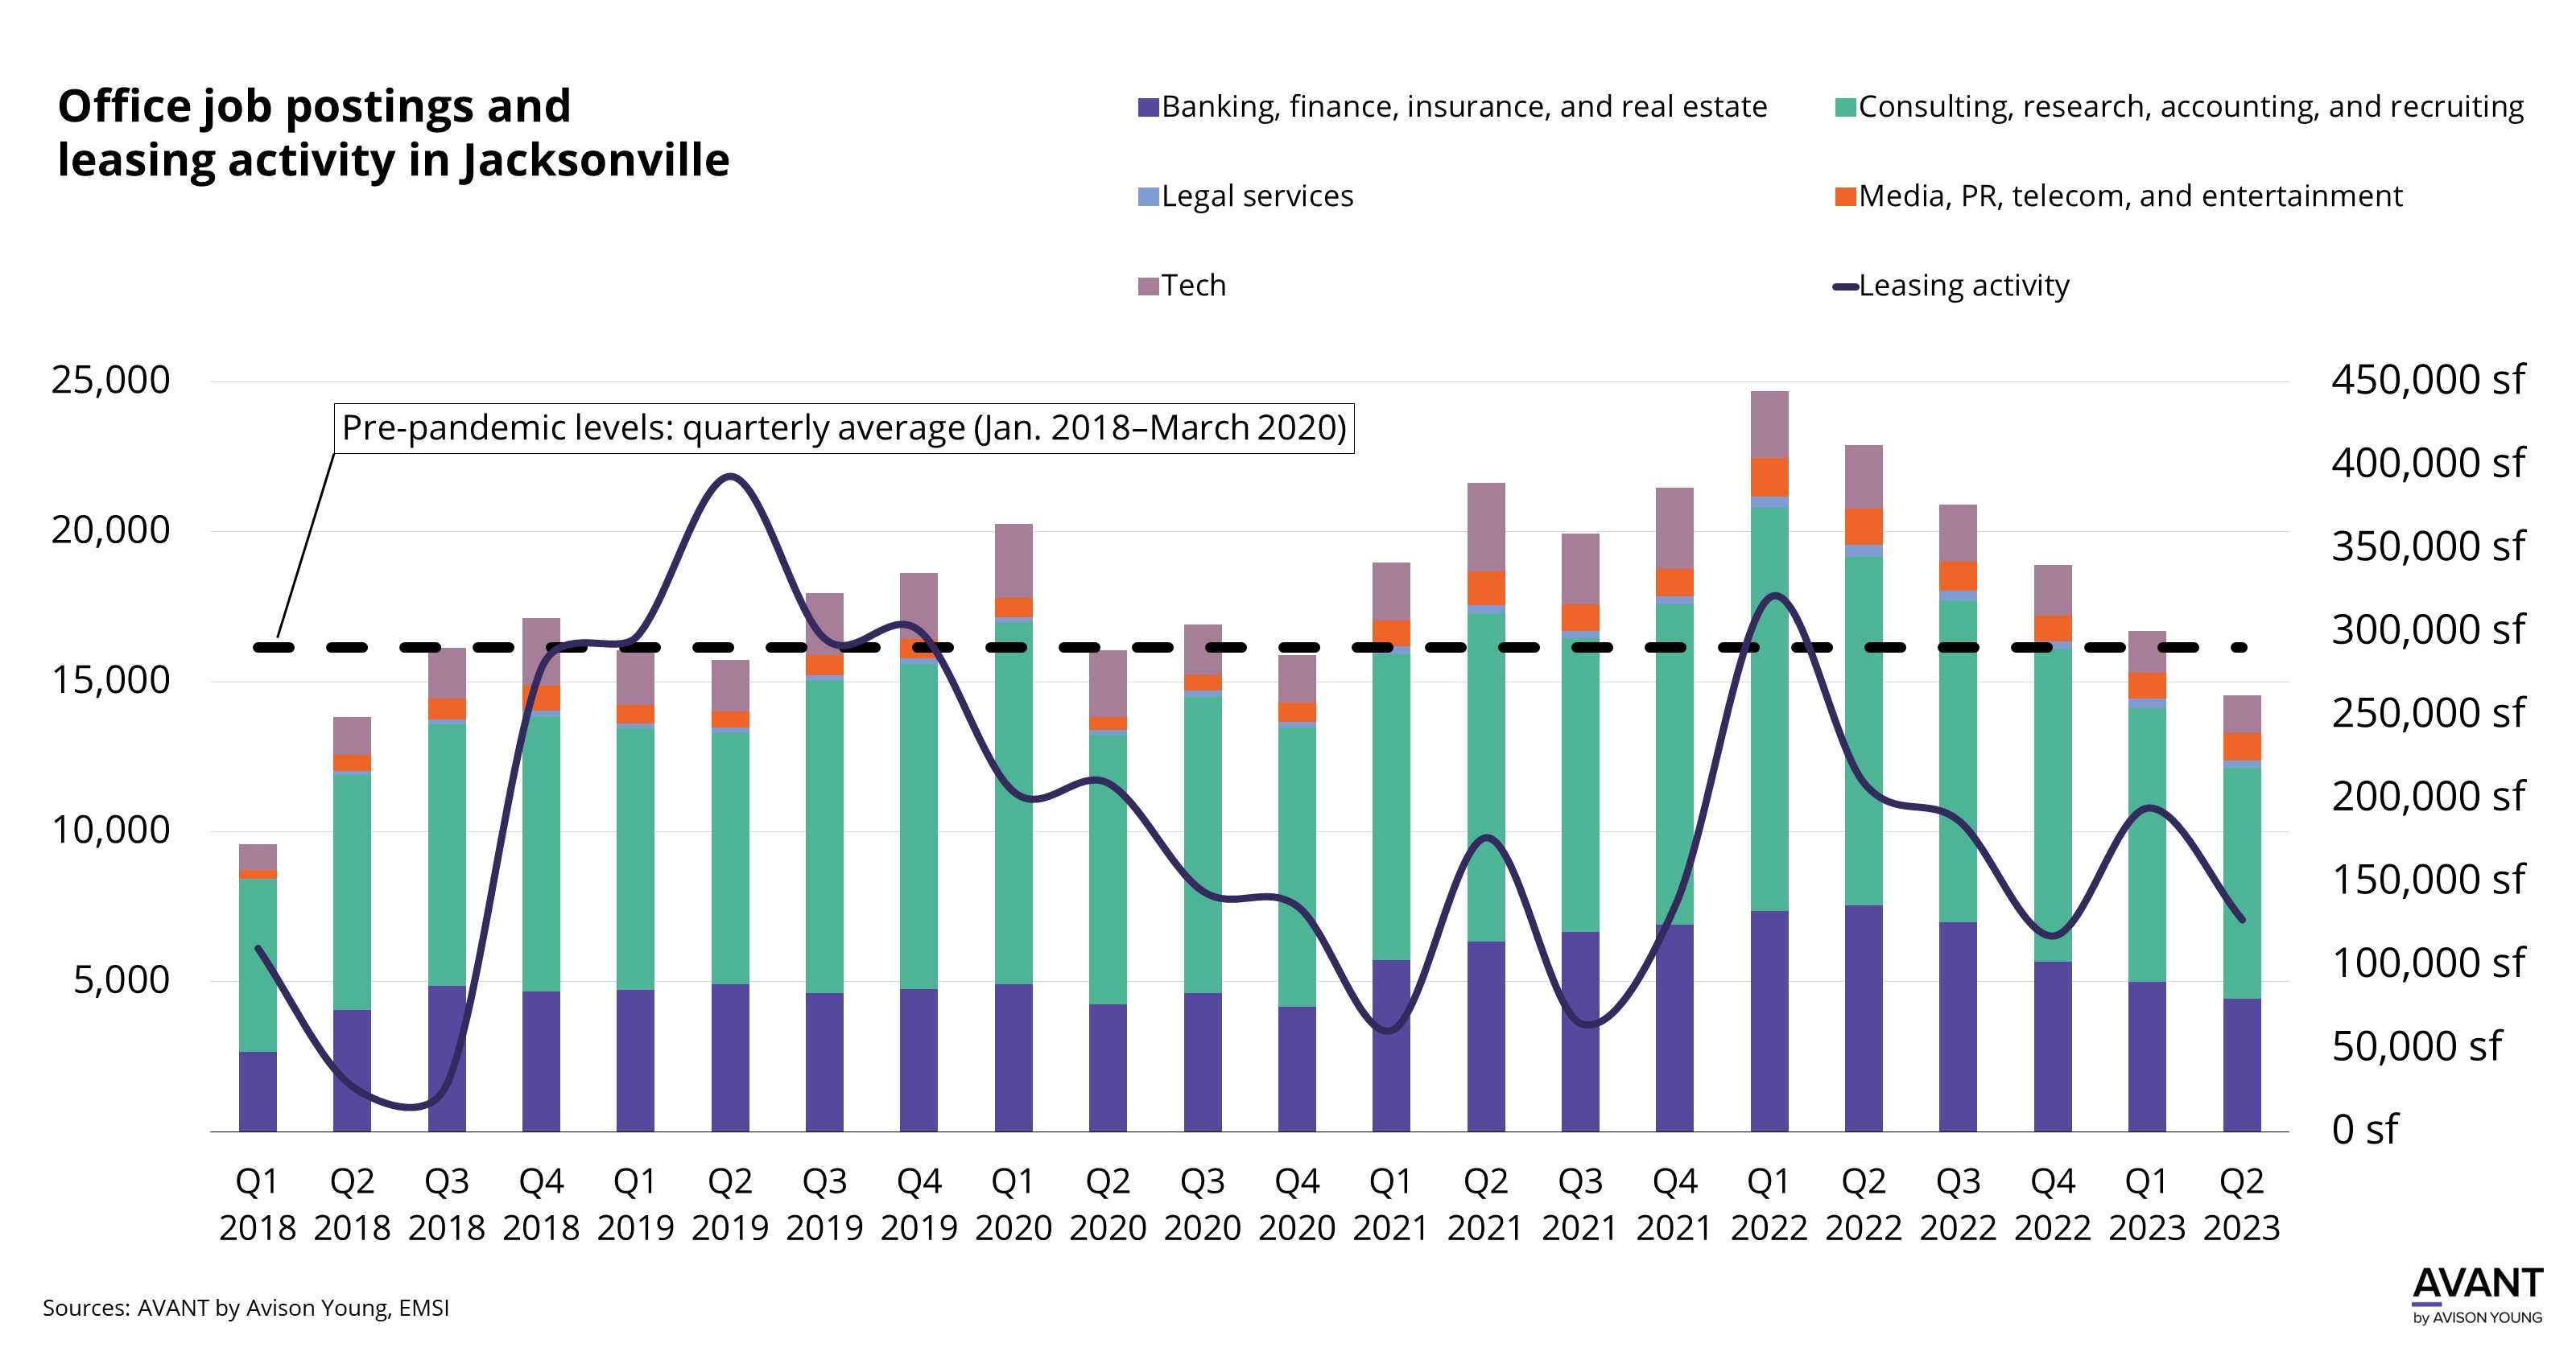 Office leasing activity decelerates in Jacksonville, exerting a dampening effect on job postings